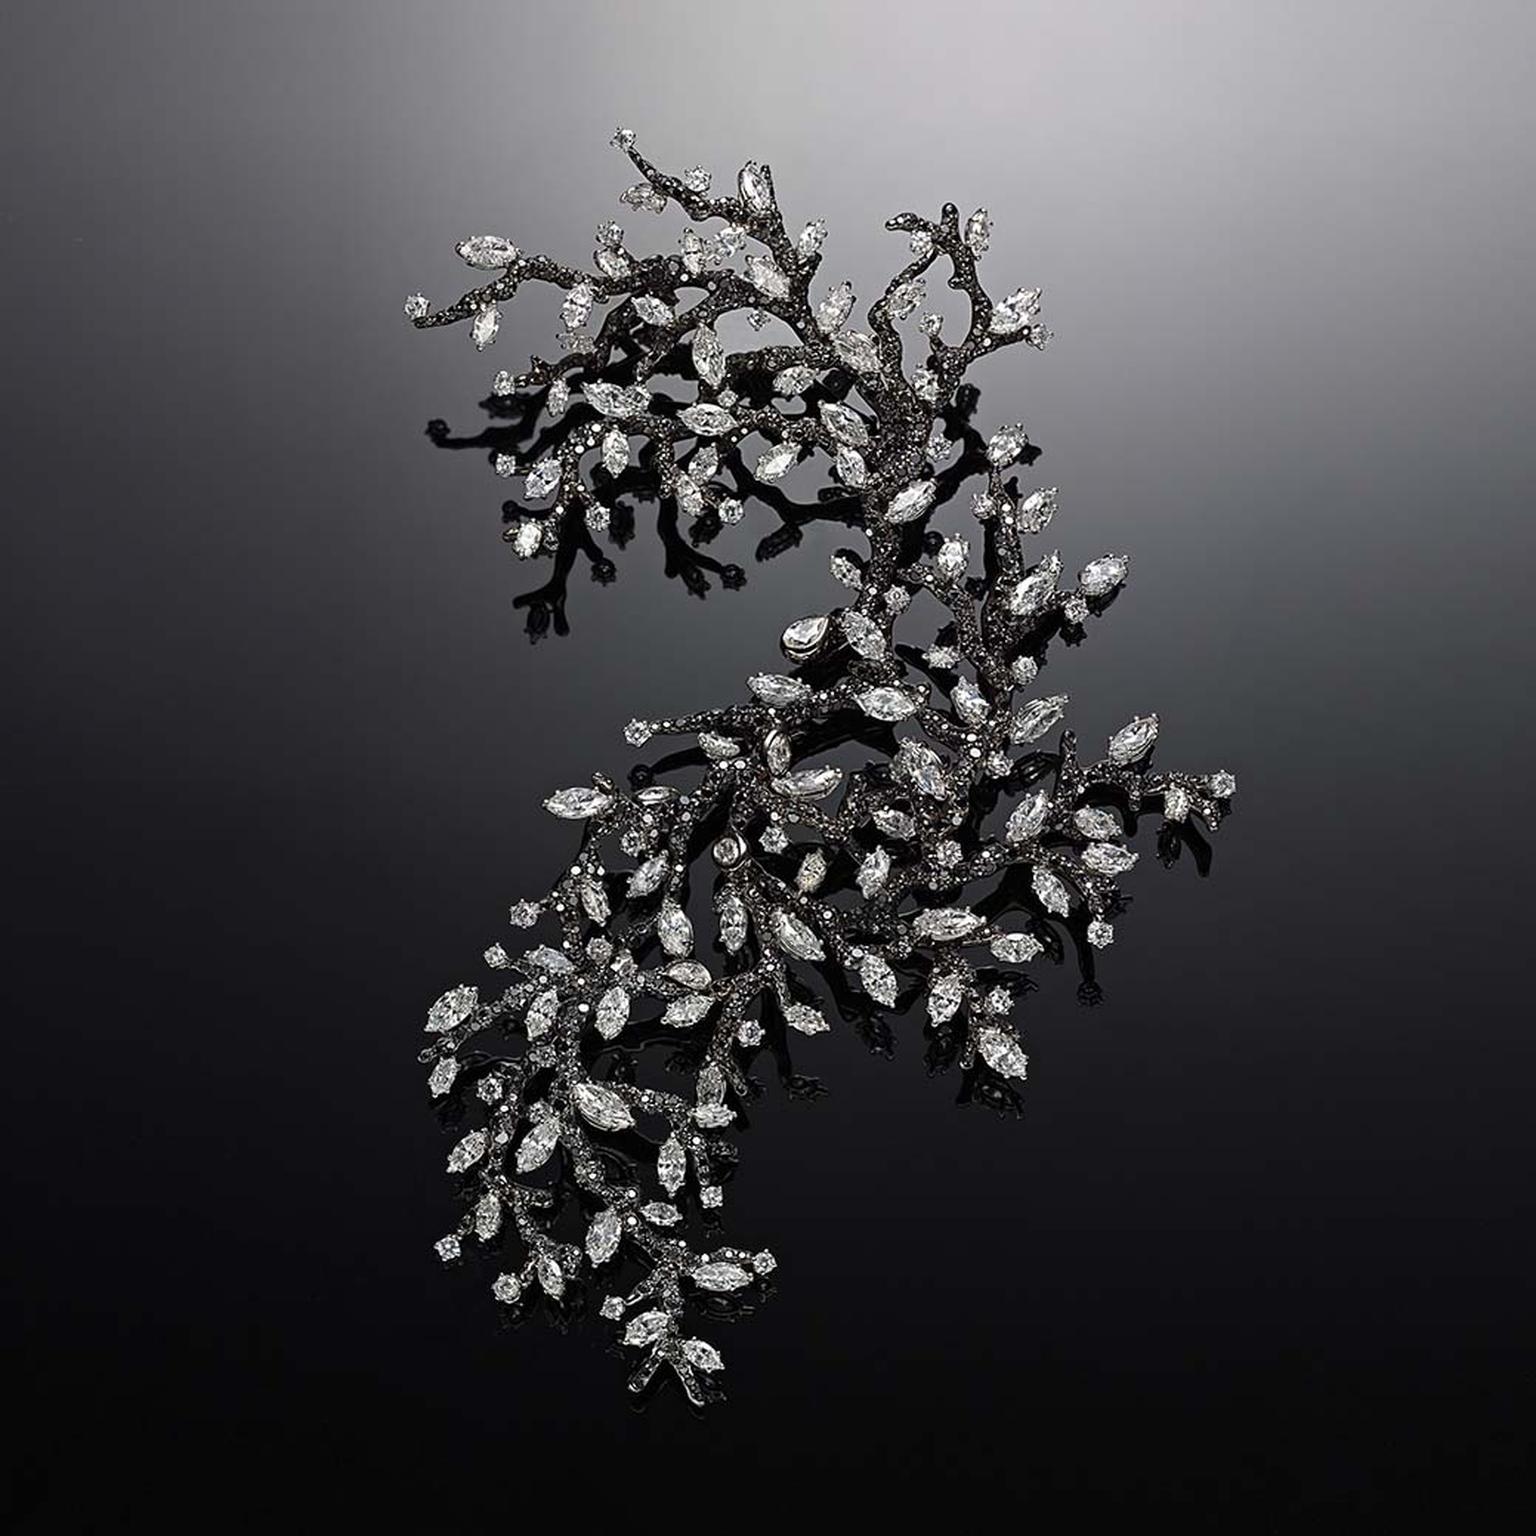 Marquise diamonds set against black diamonds in Cindy Chao’s Winter Branch brooch